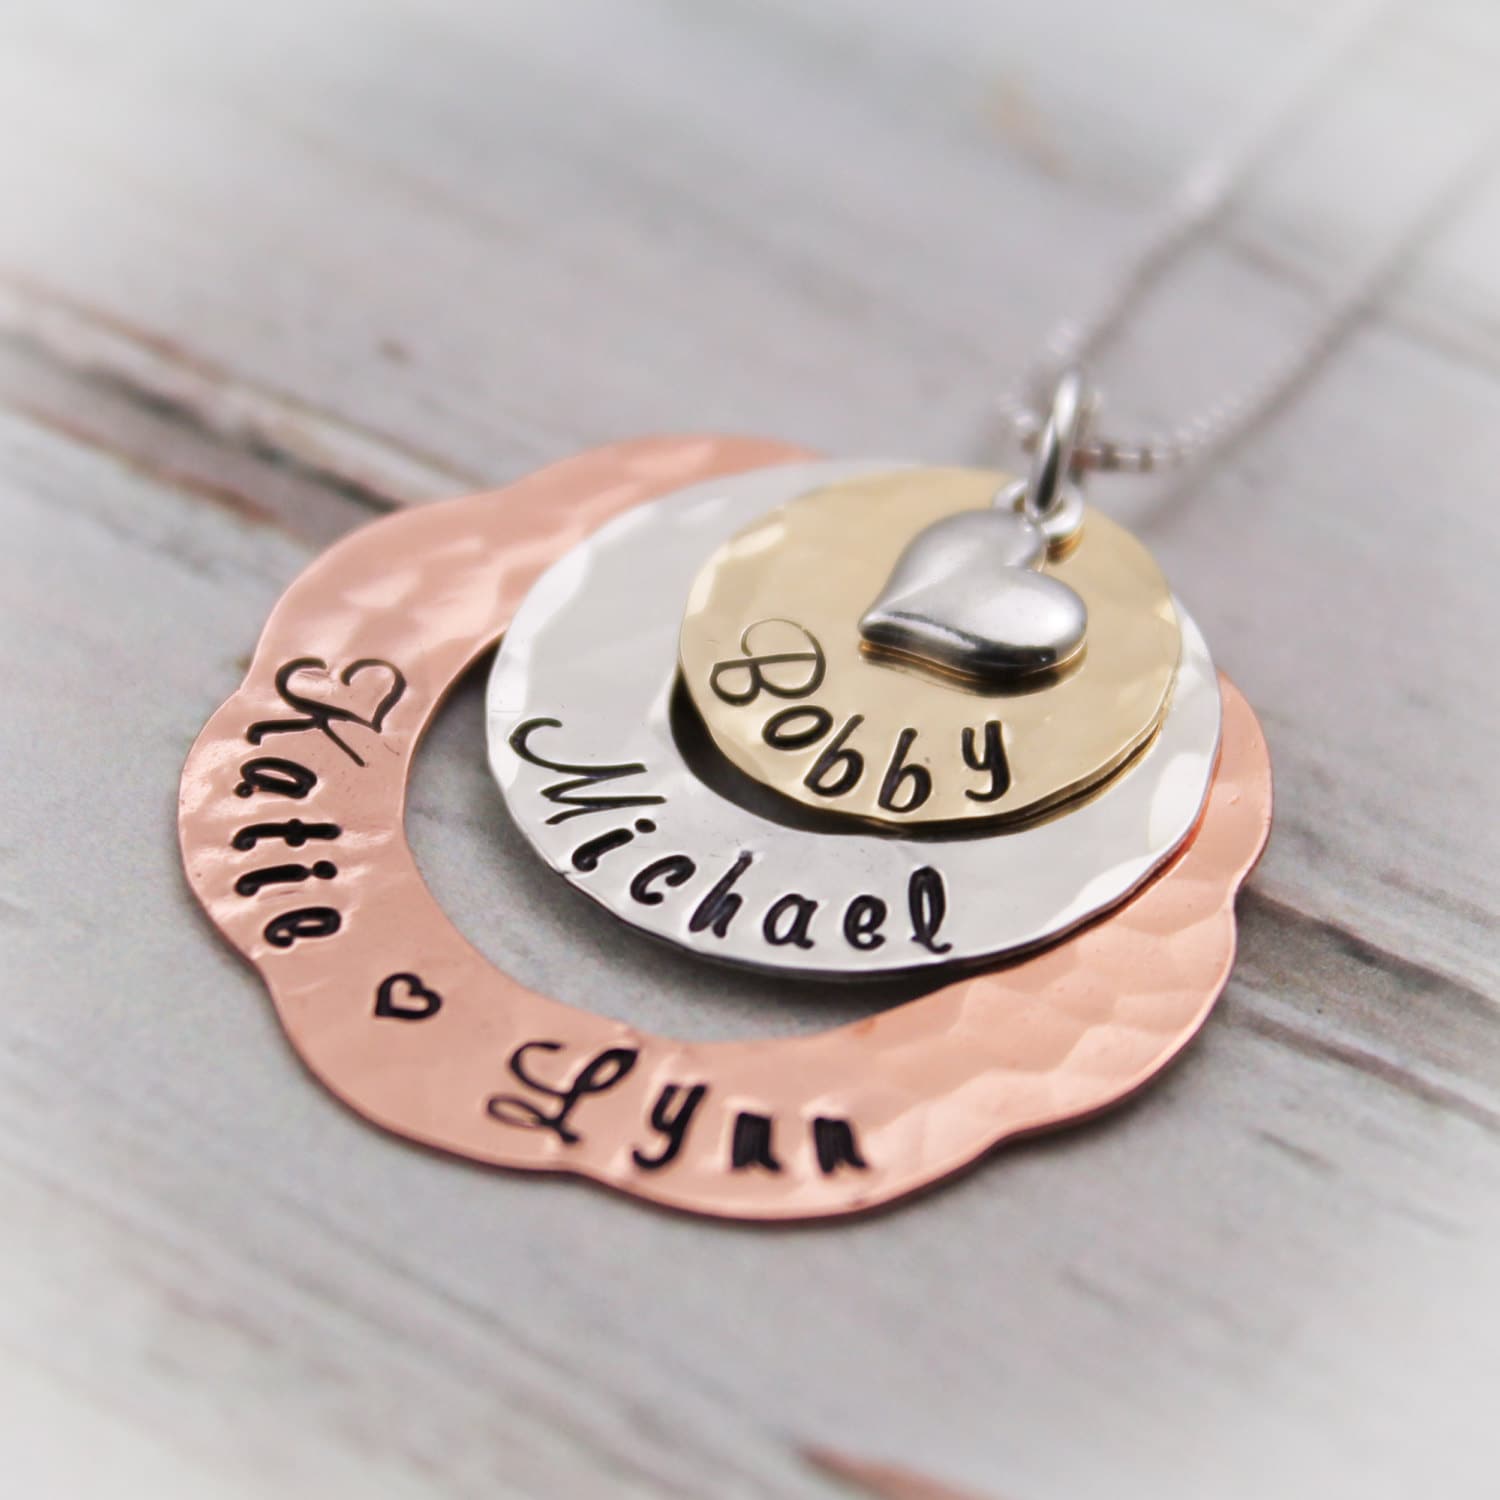 Fancy Washer Layered Mother or Grandma Necklace Personalized Hand Stamped Jewelry-